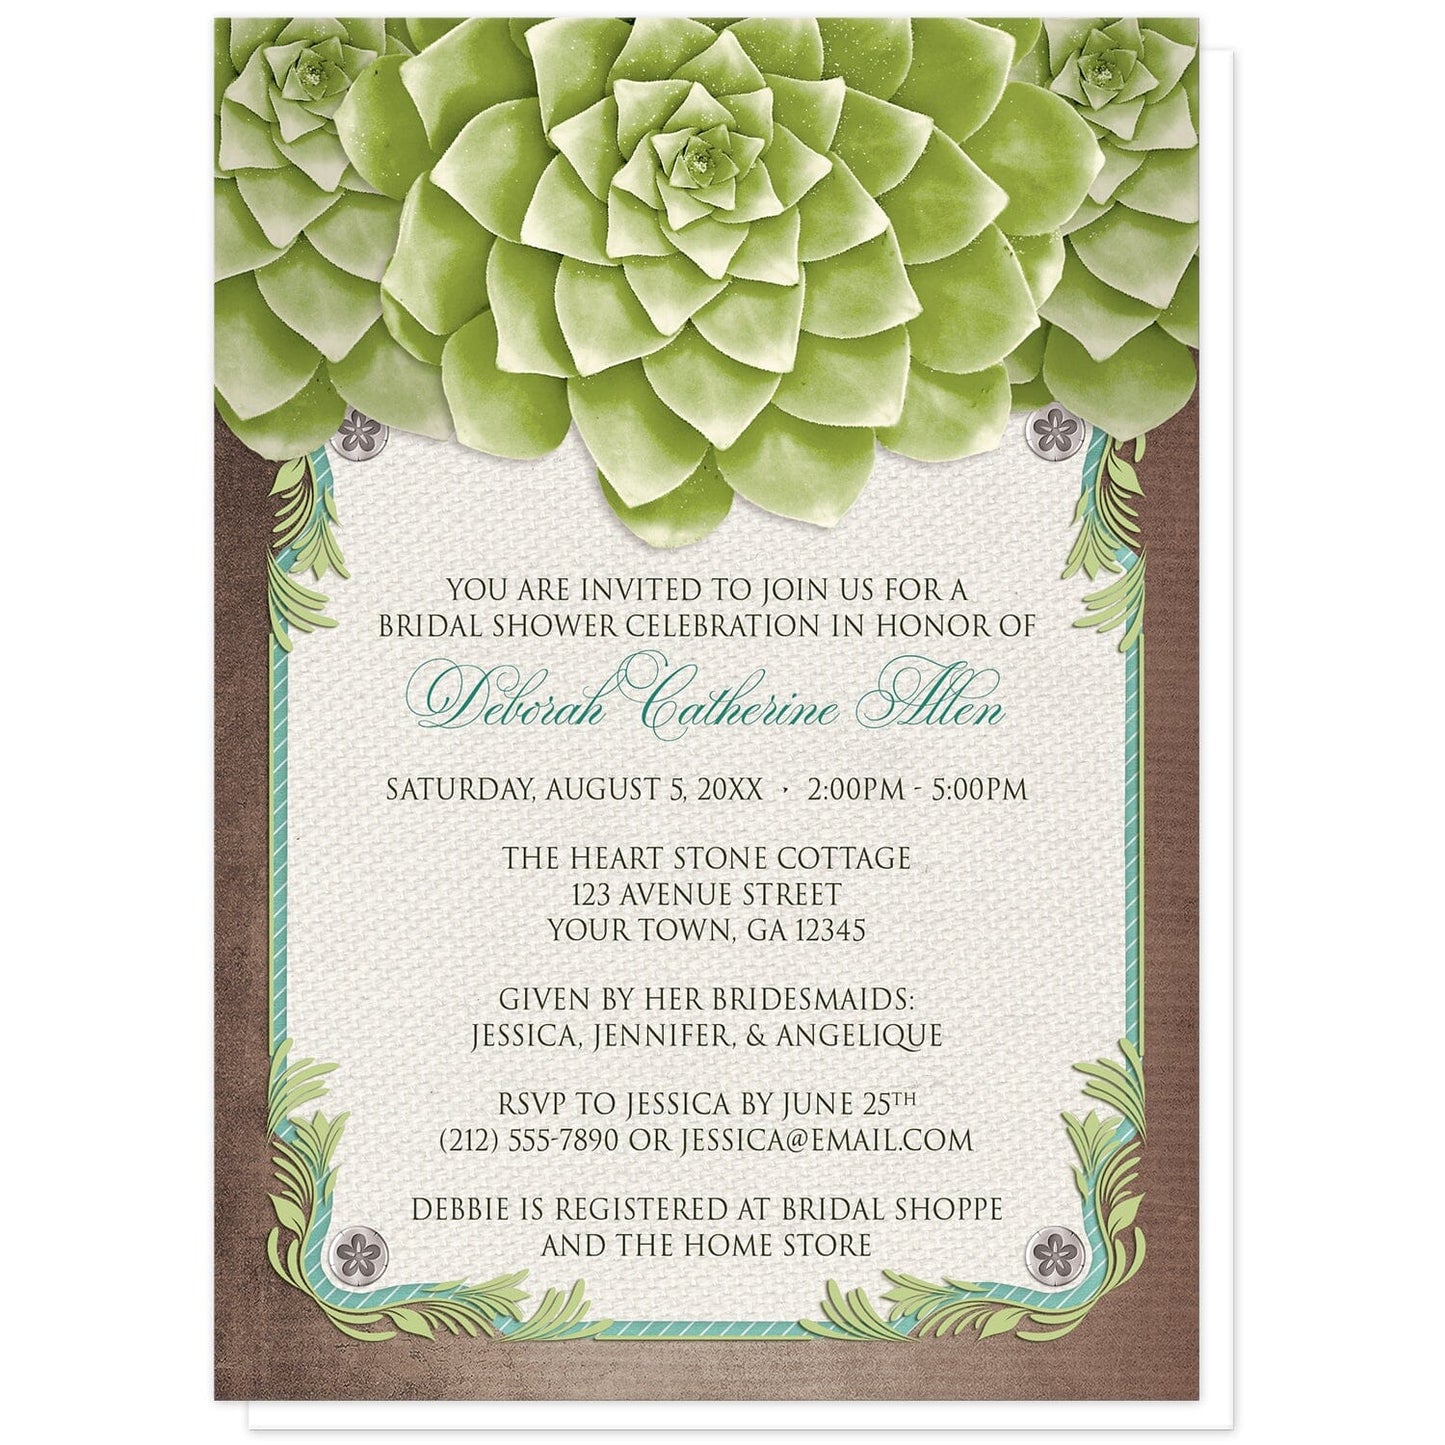 Rustic Succulent Garden Bridal Shower Invitations at Artistically Invited. Invites with three large and lovely green succulents along the top over a beige canvas texture illustration framed with a leafy green decorative border, striped teal, and four floral metal pin illustrations, all over a brown background along the edges. Your personalized bridal shower celebration details are custom printed in brown and teal over the beige canvas background in the center area below the succulents. 